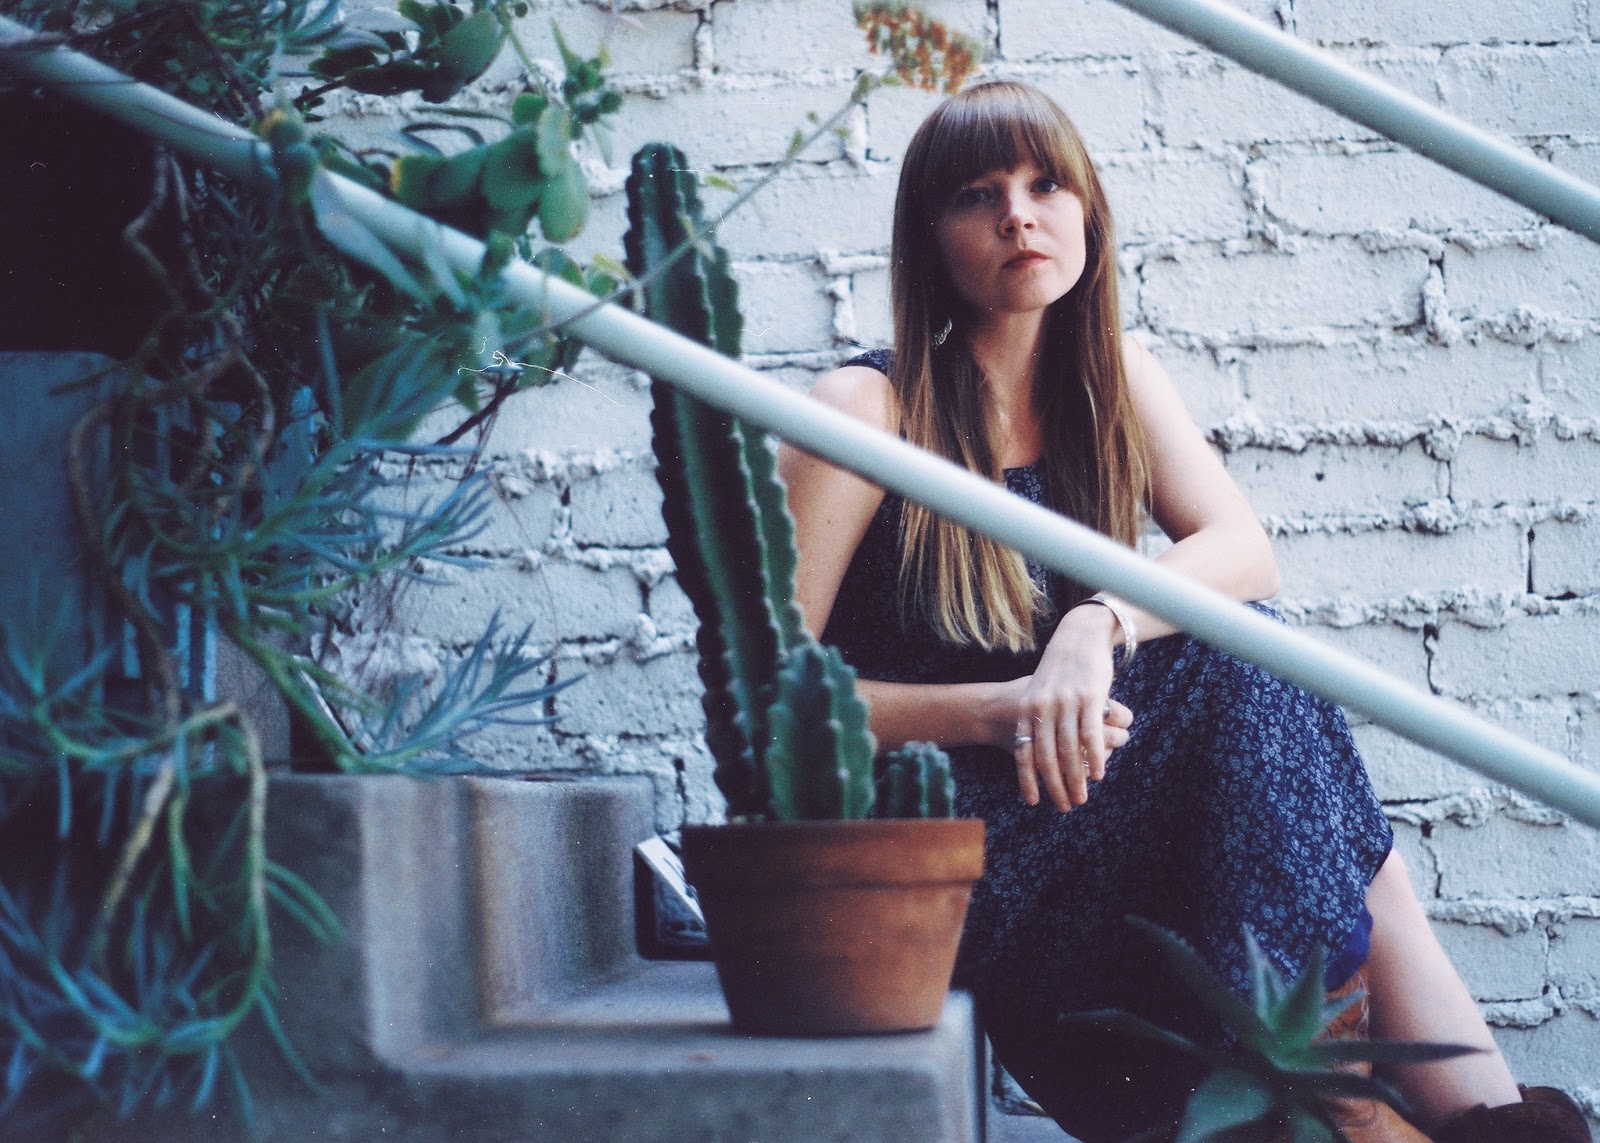 Watch Courtney Marie Andrews’ New Video For “Irene”